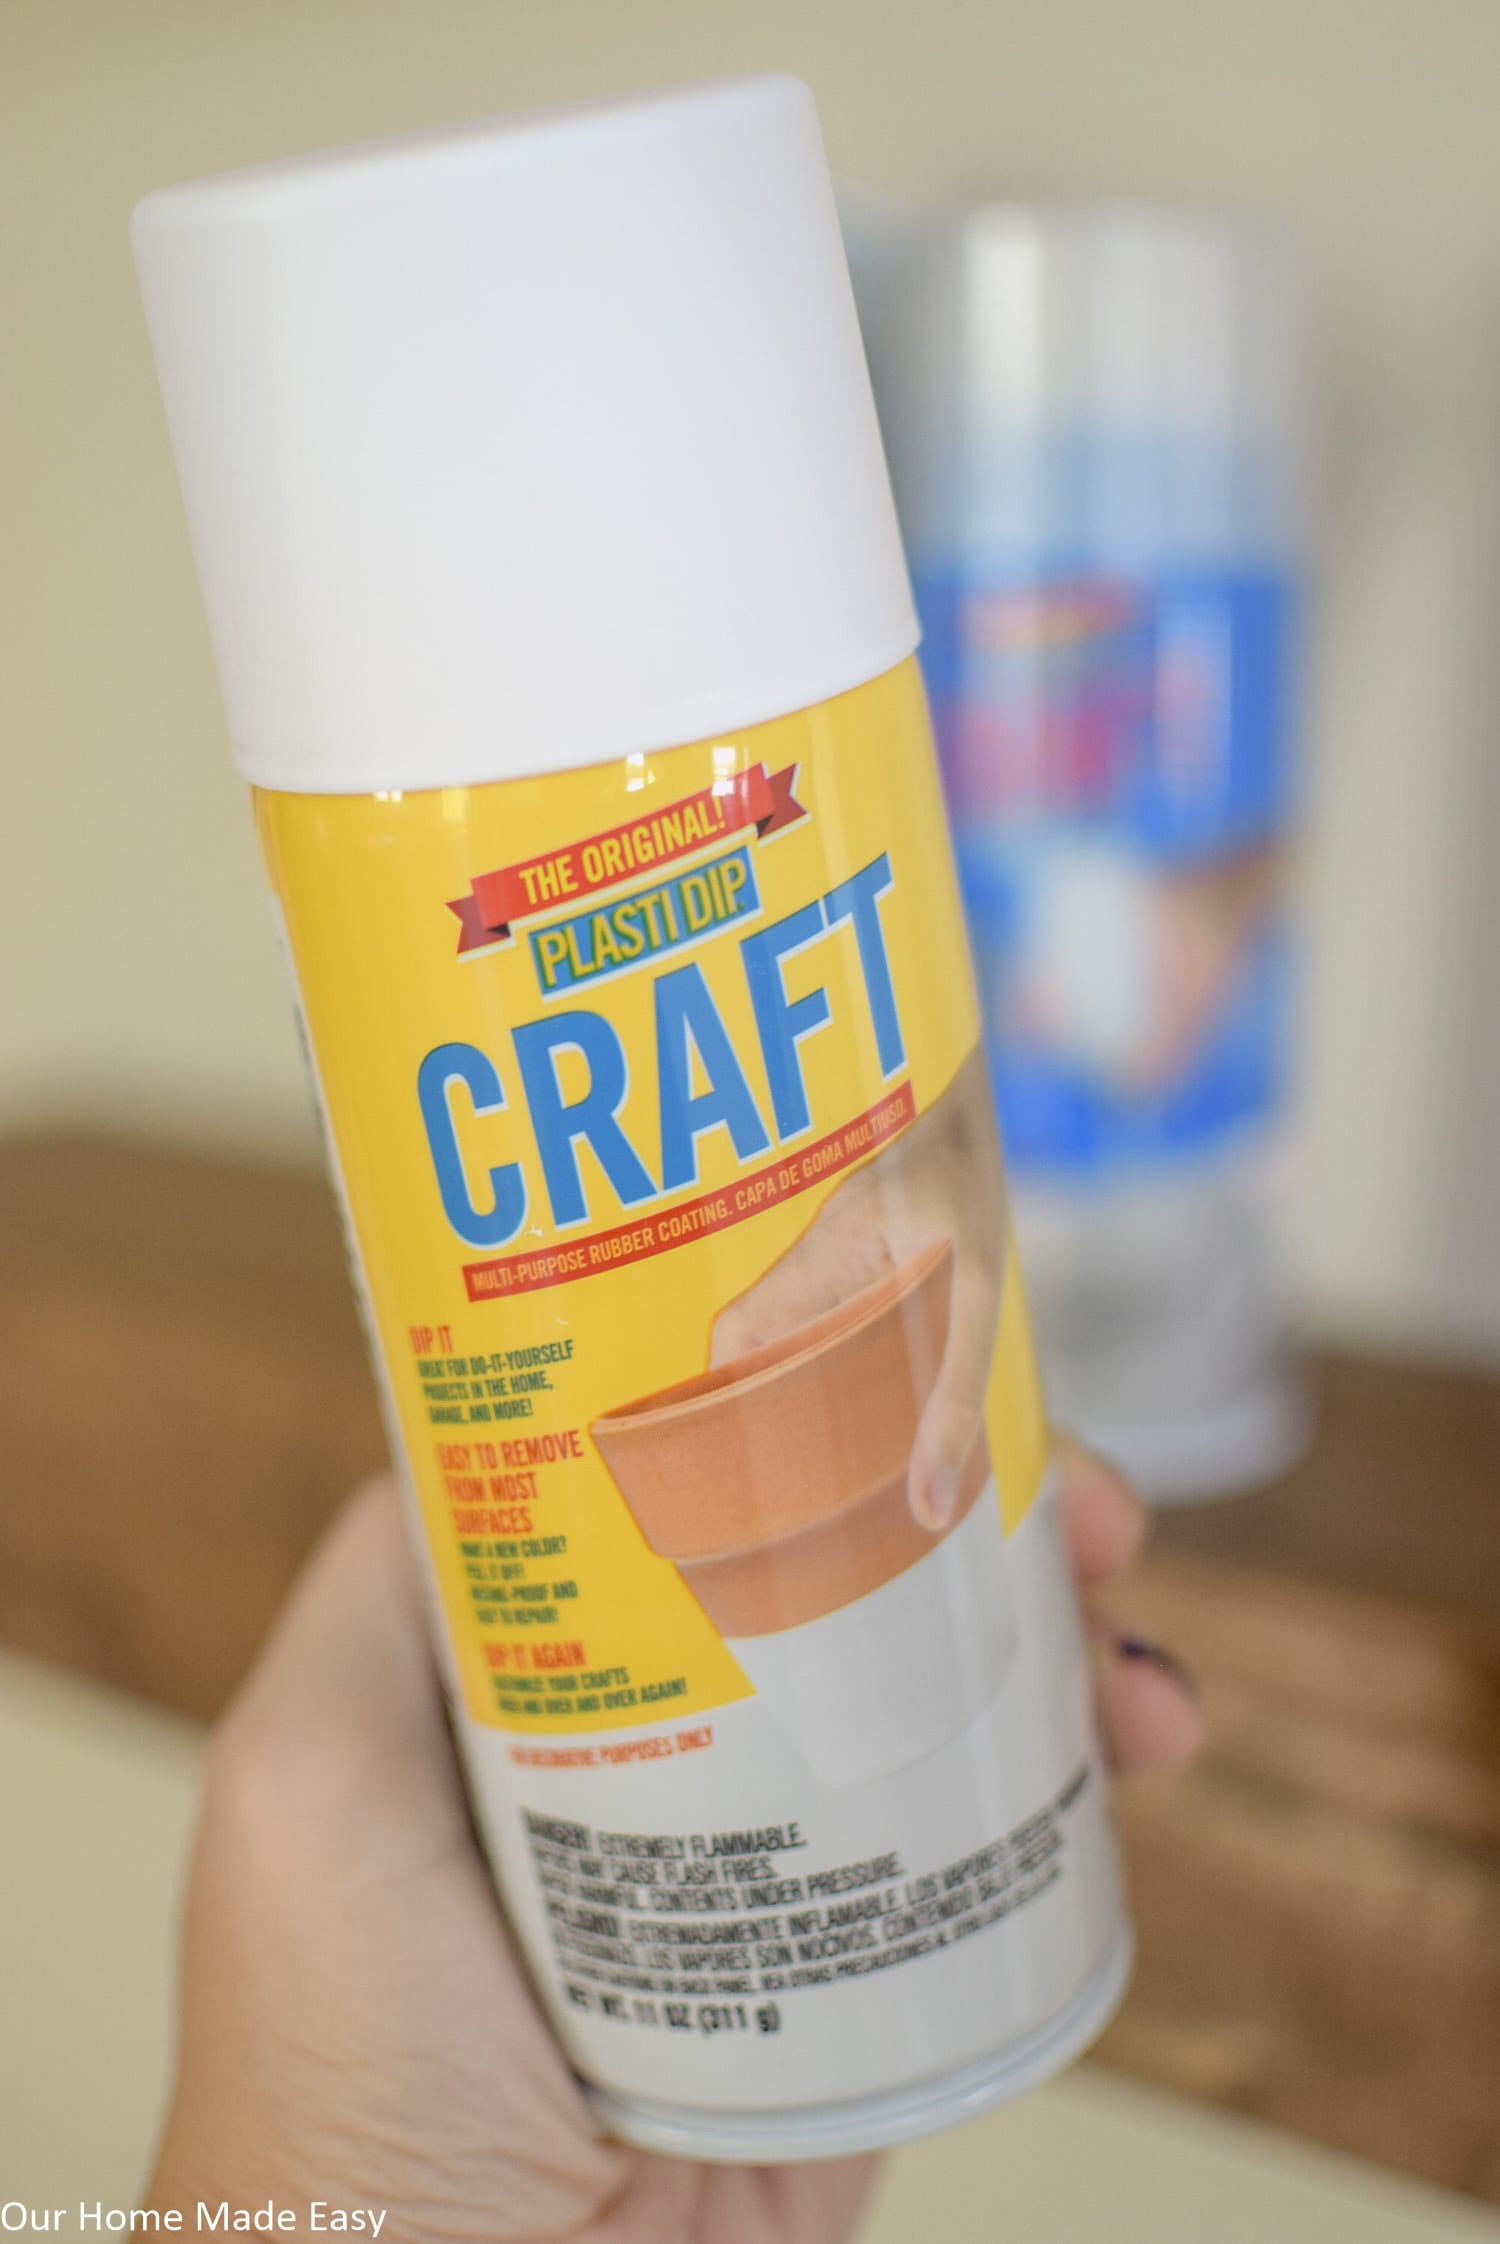 Plasti Dip Spray Paint is a great way to quickly give crafts a new look